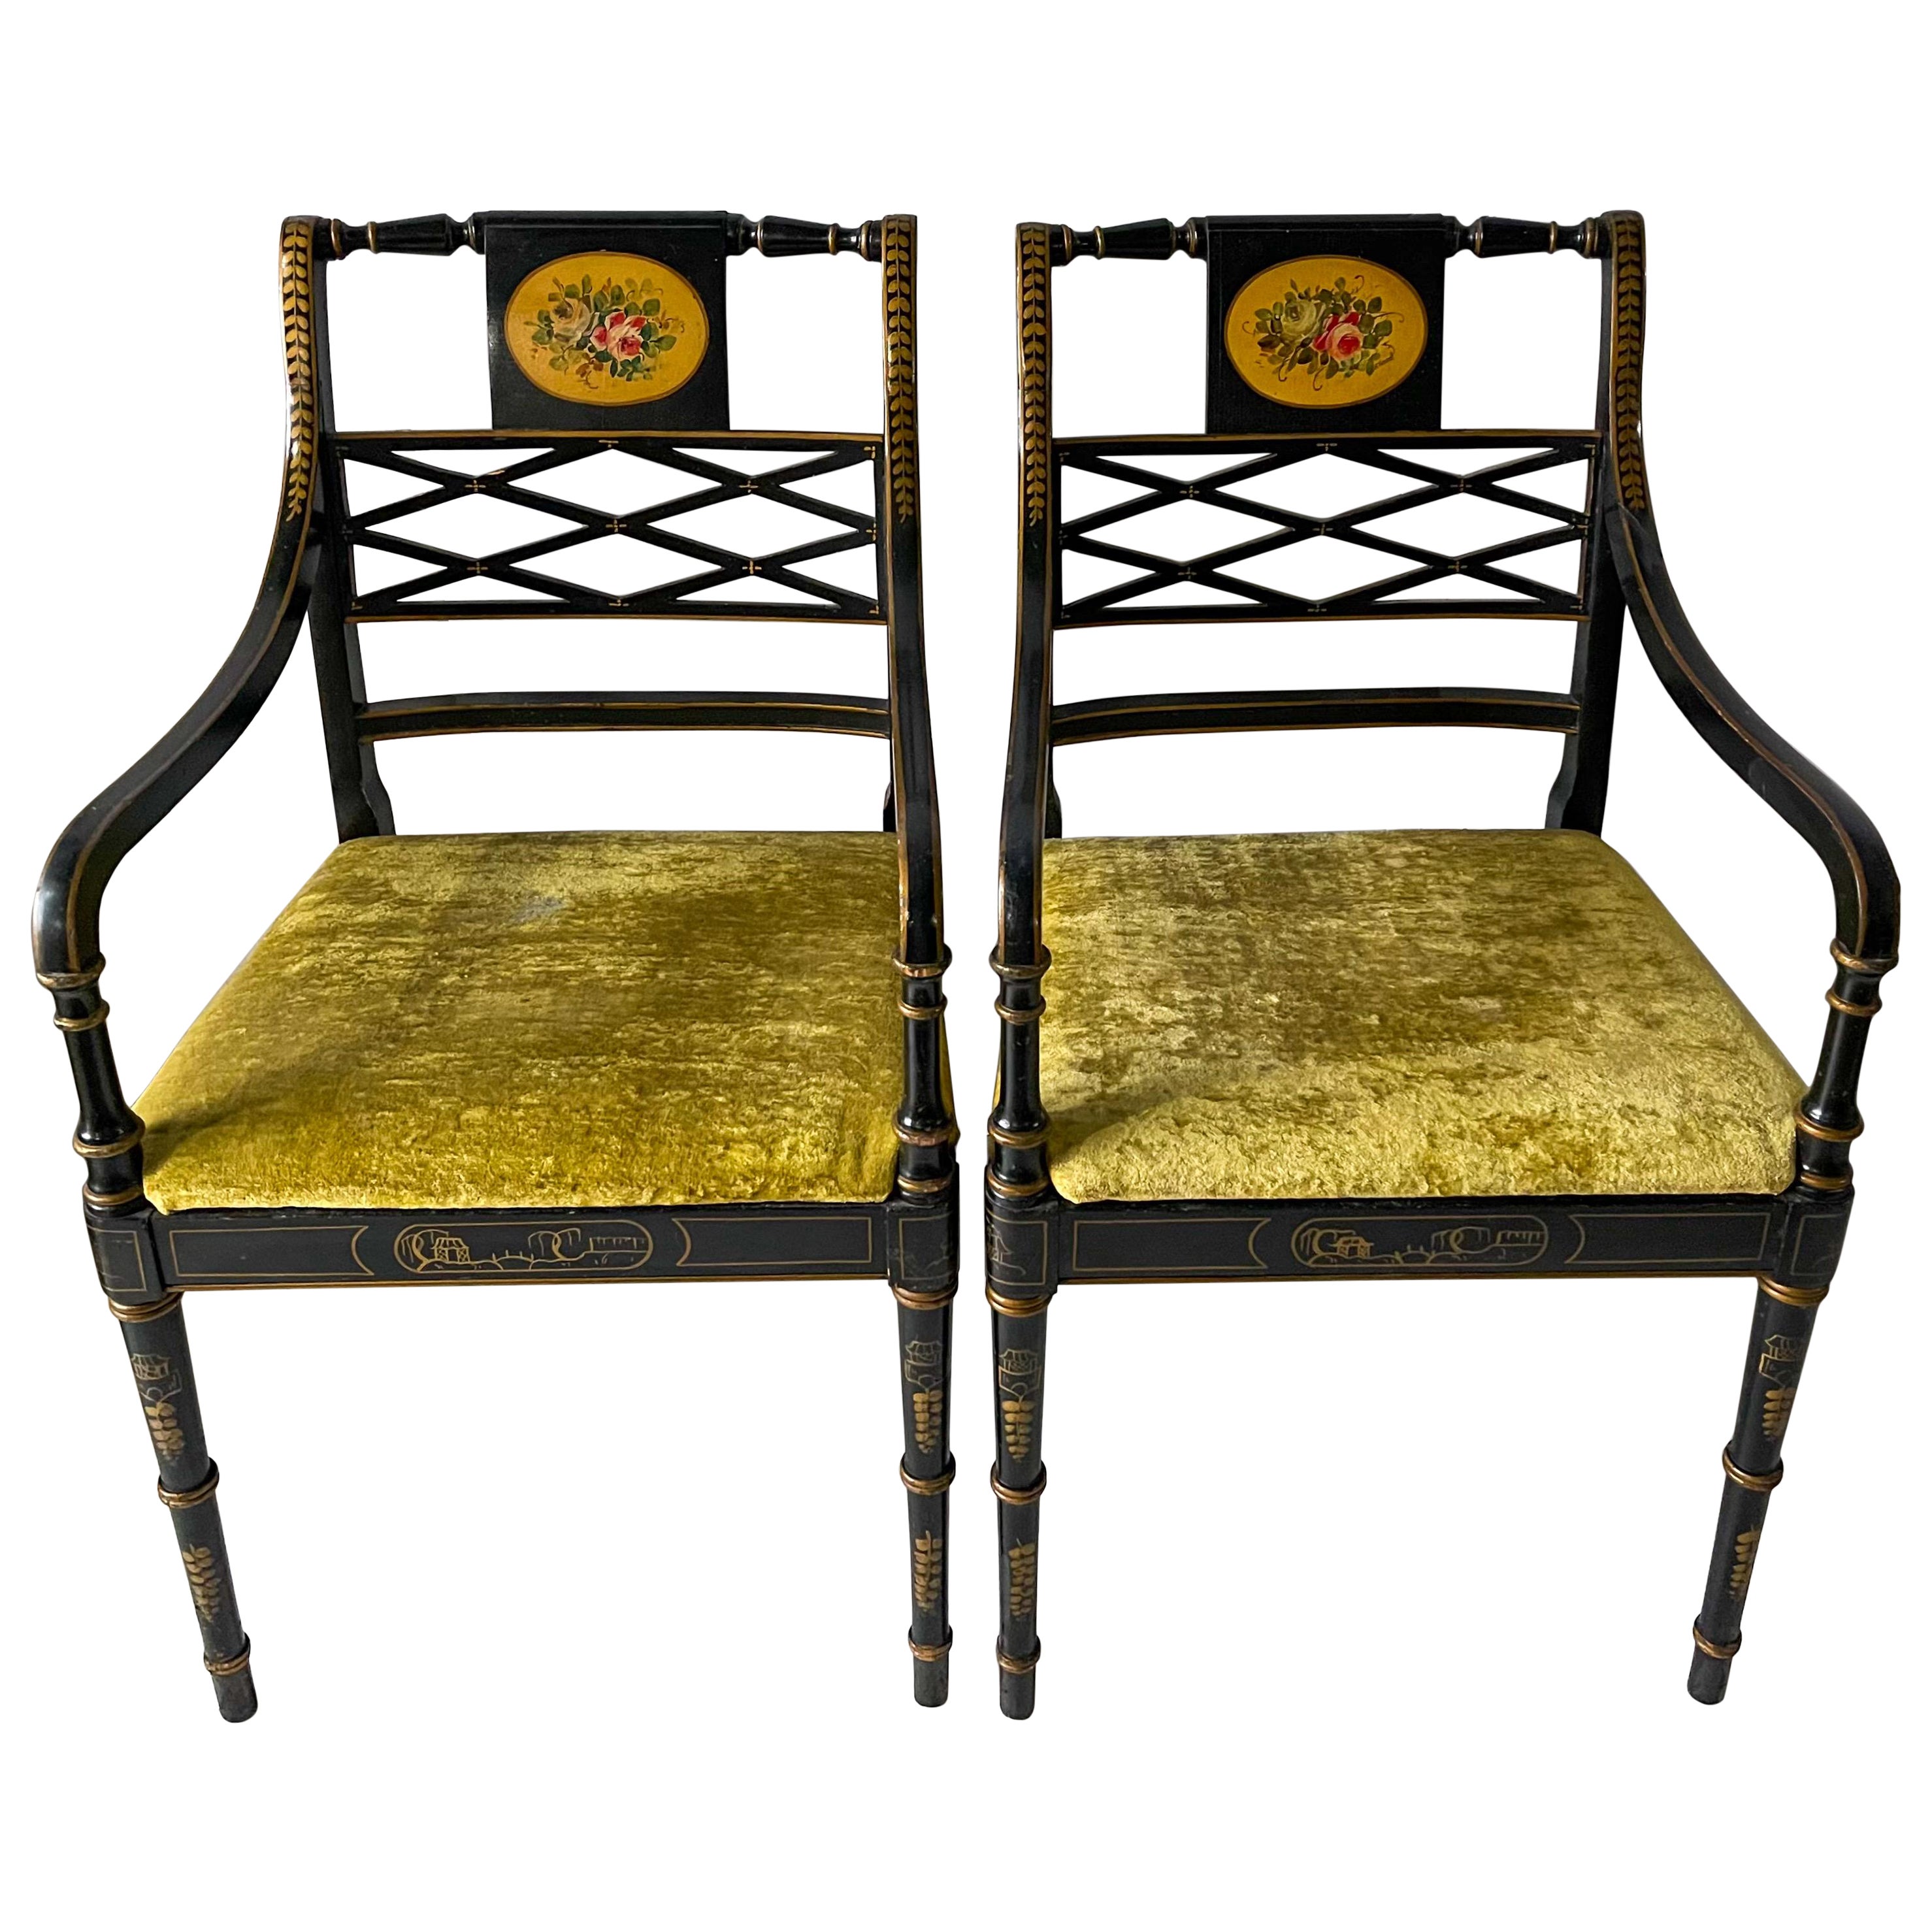 Regency Style Painted Black Lacquer Chinoiserie Bergere Chairs, Pair